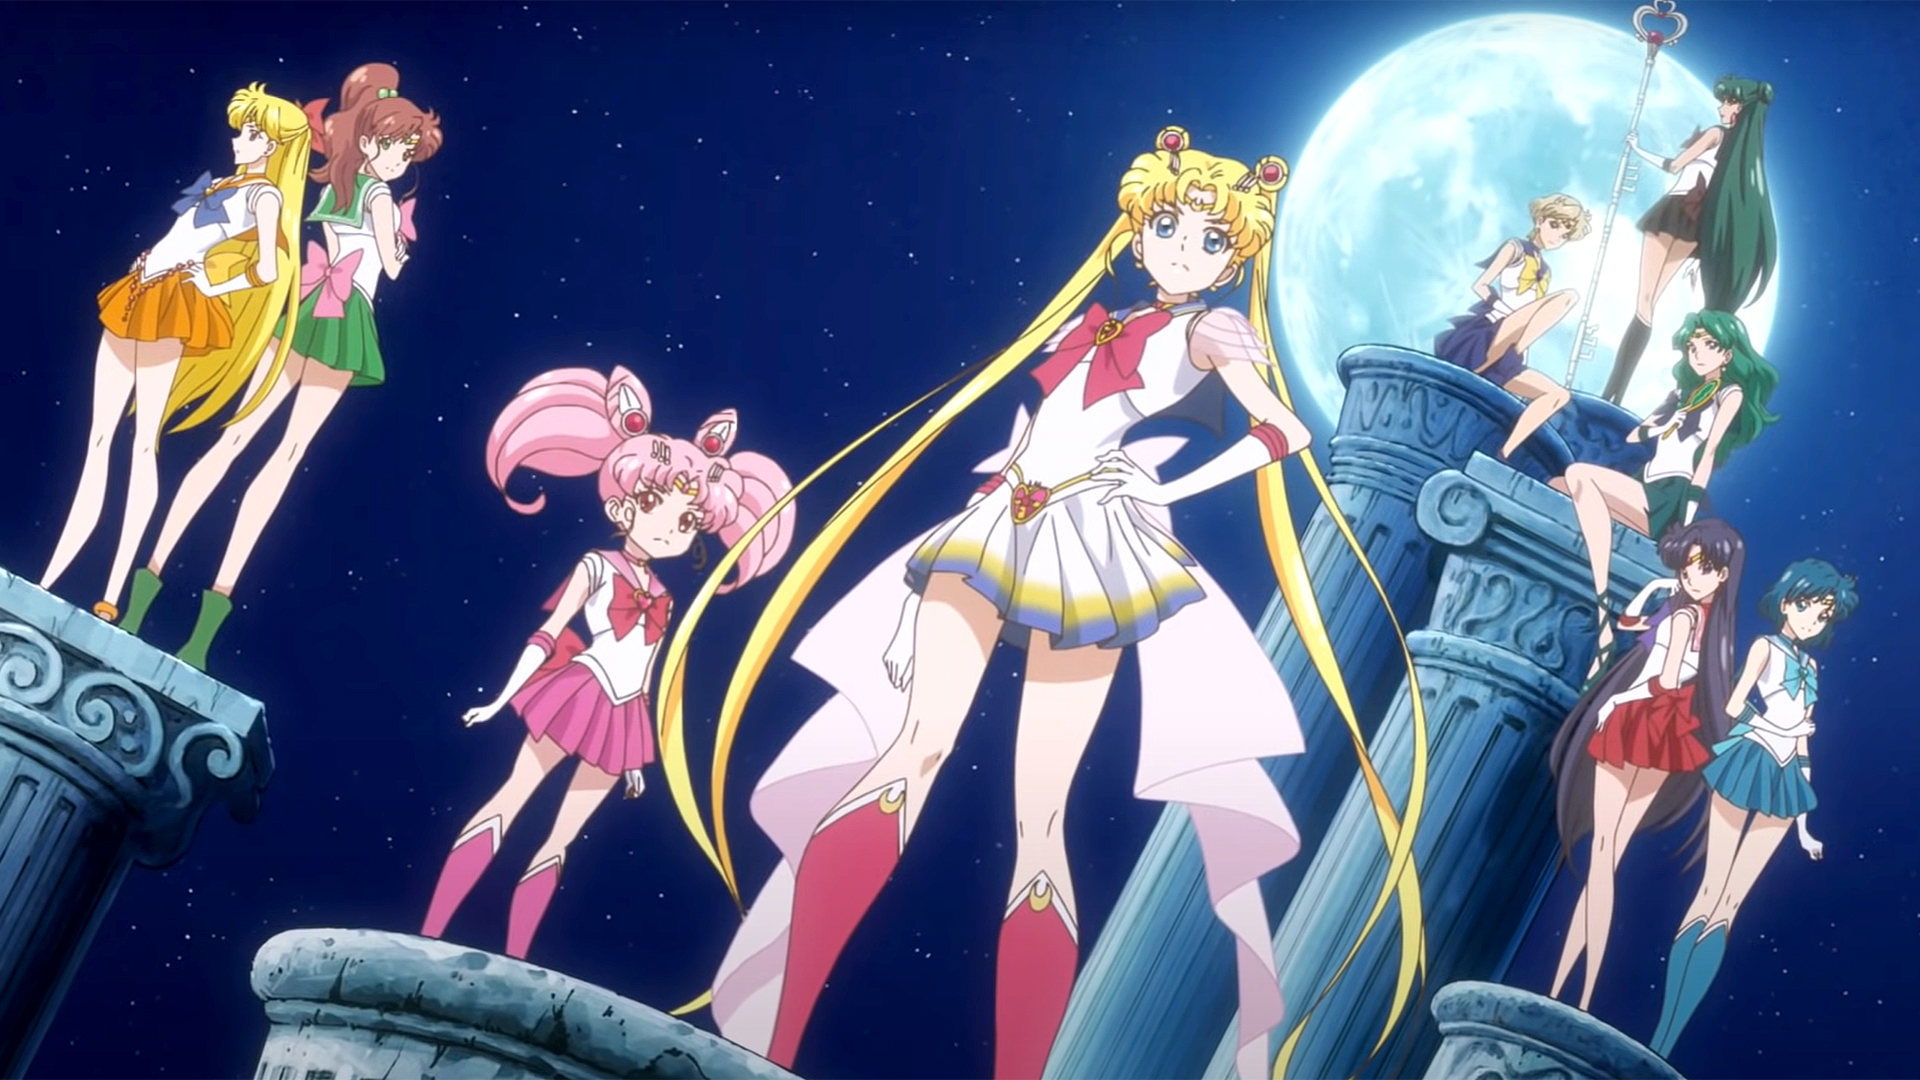 Sailor Moon Crystal Season 3 opening credits scene with Super Sailor Moon and the Sailor Guardians.